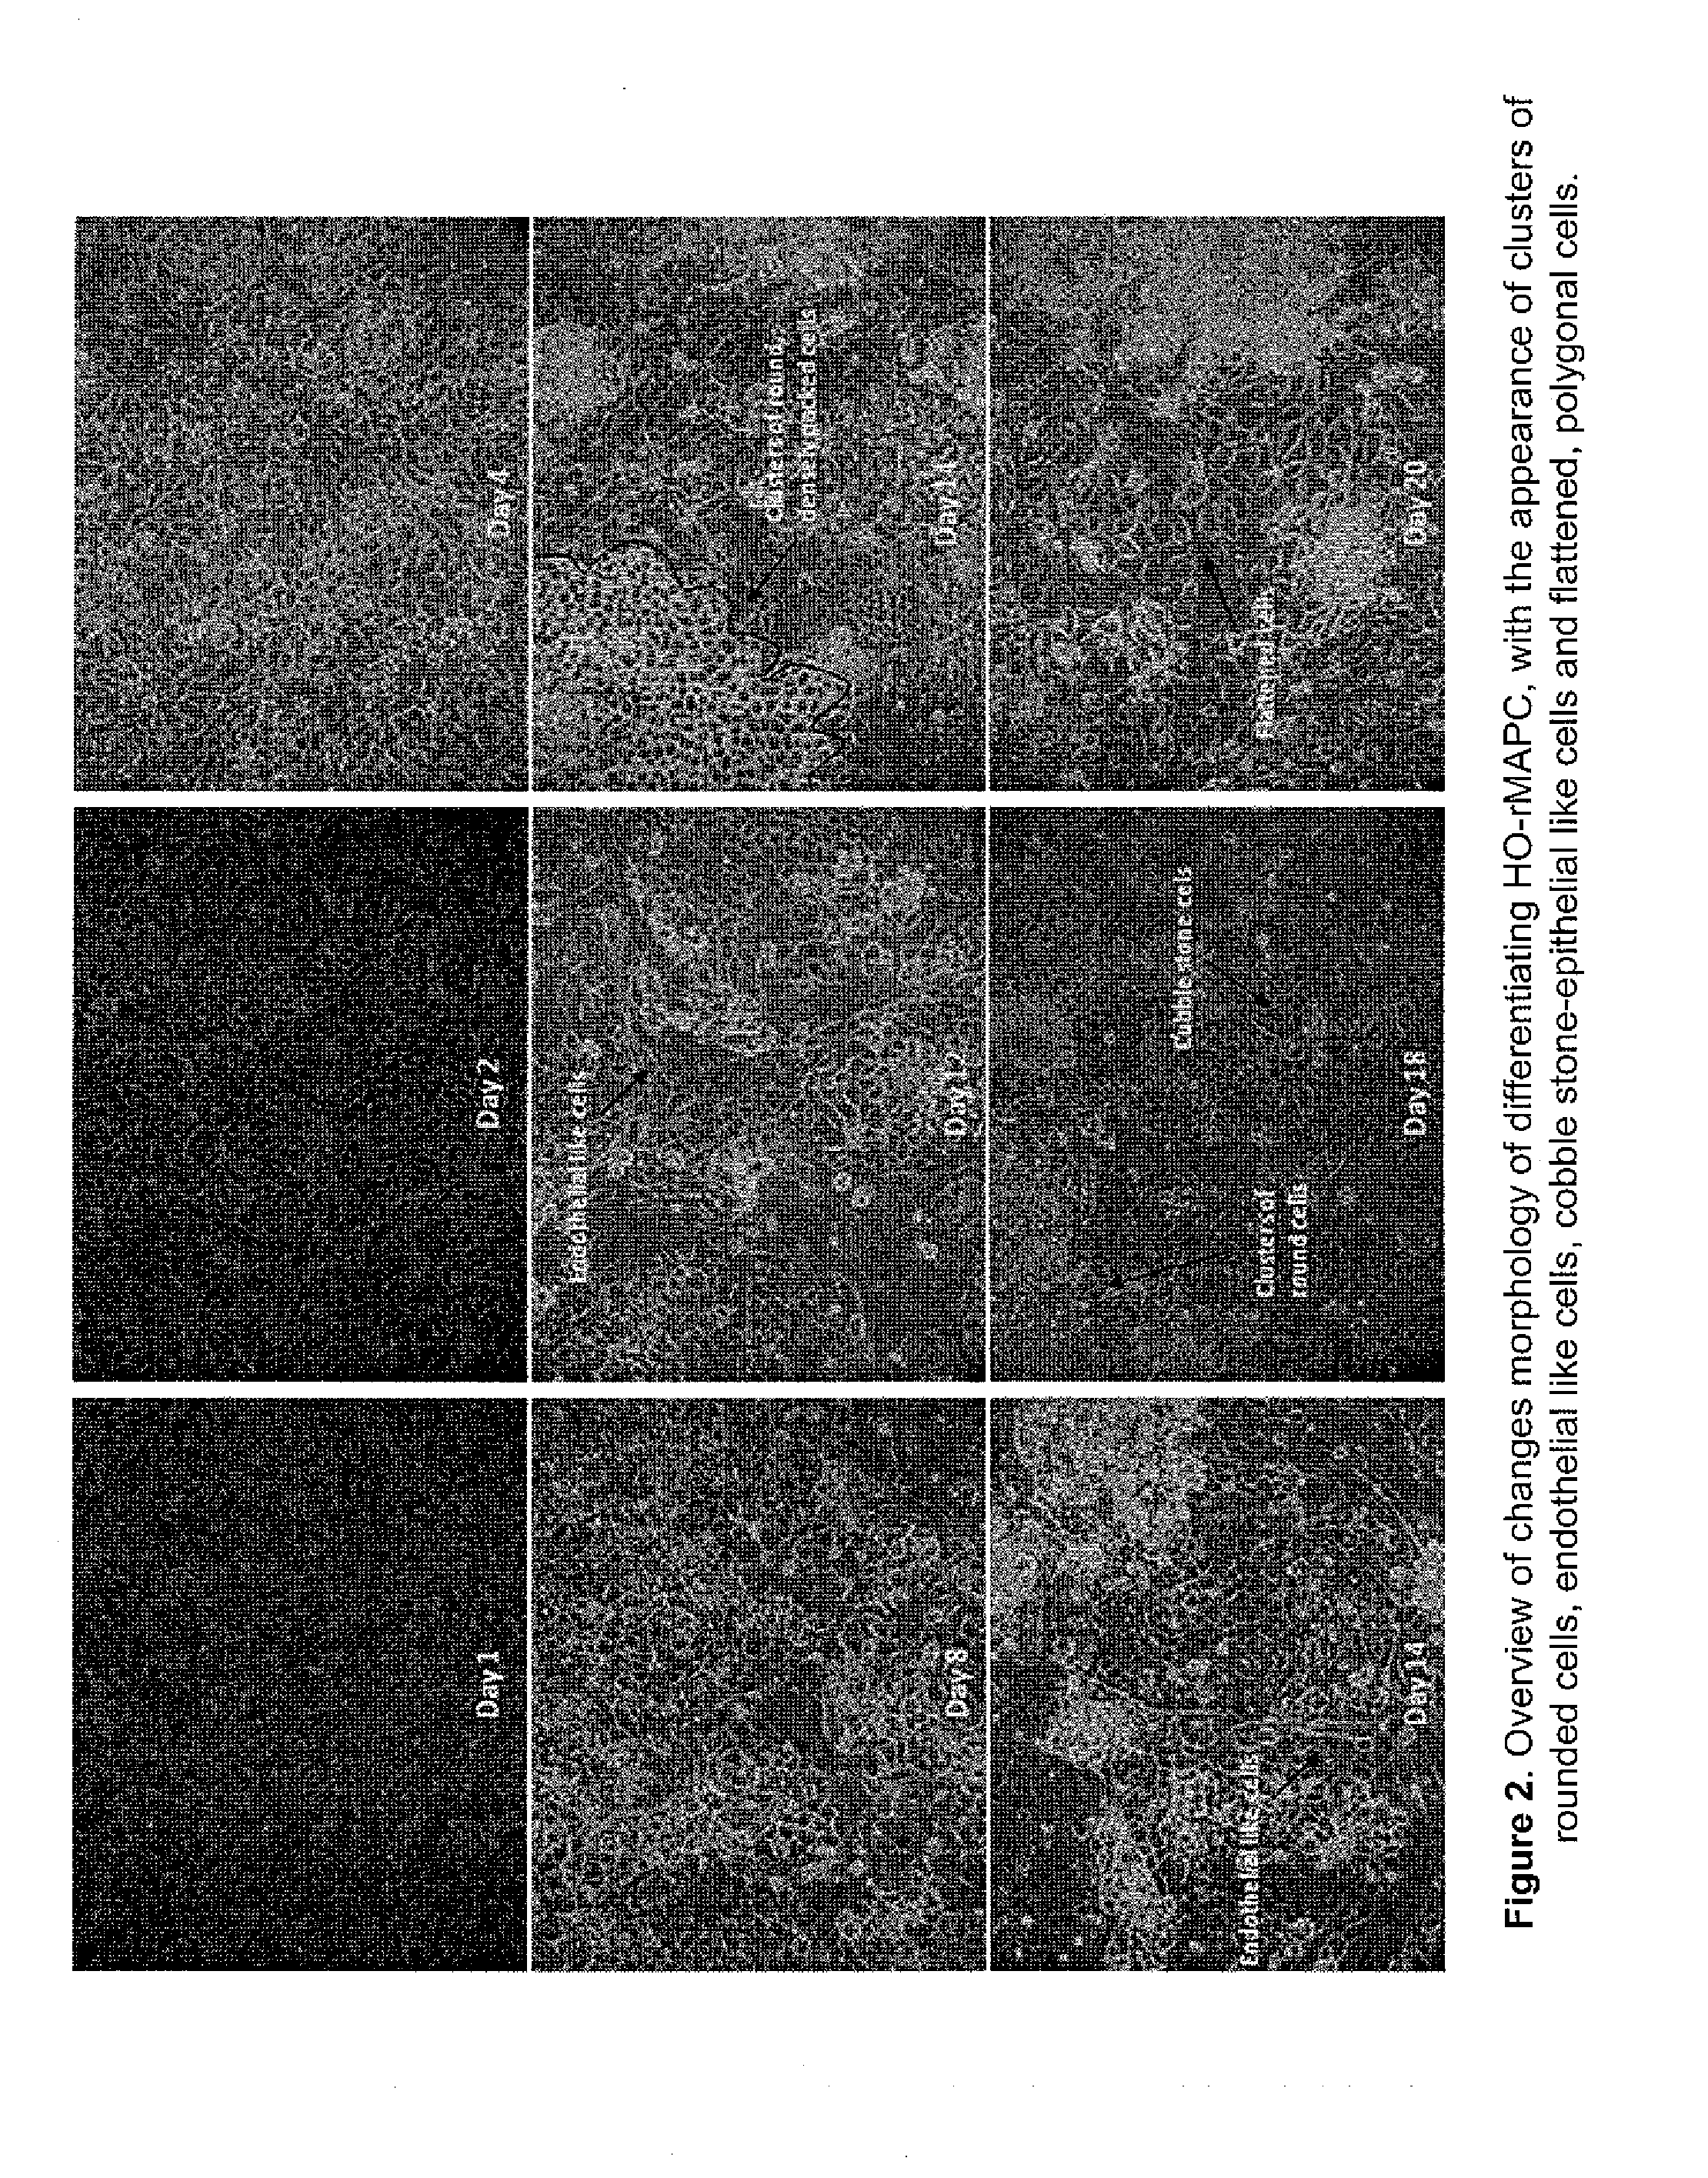 Optimized Methods for Differentiation of Cells into Cells With Hepatocyte and Hepatocyte Progenitor Phenotypes, Cells Produced by the Methods, and Methods of Using the Cells